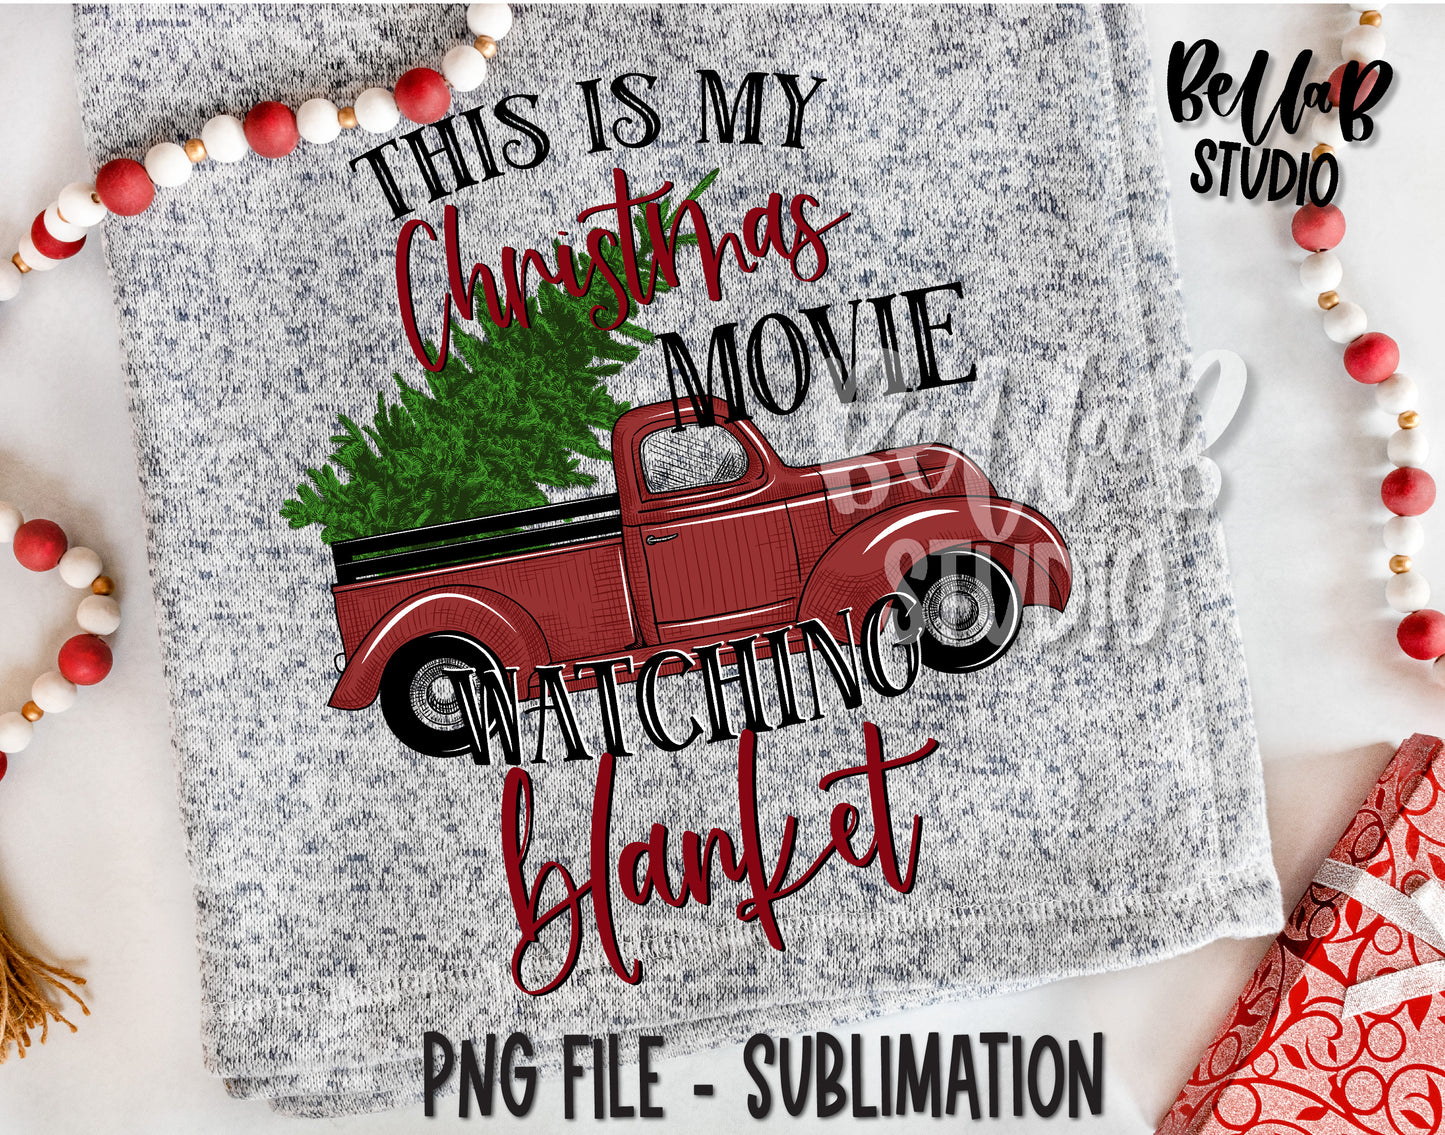 This Is My Christmas Movie Watching Blanket Sublimation Design